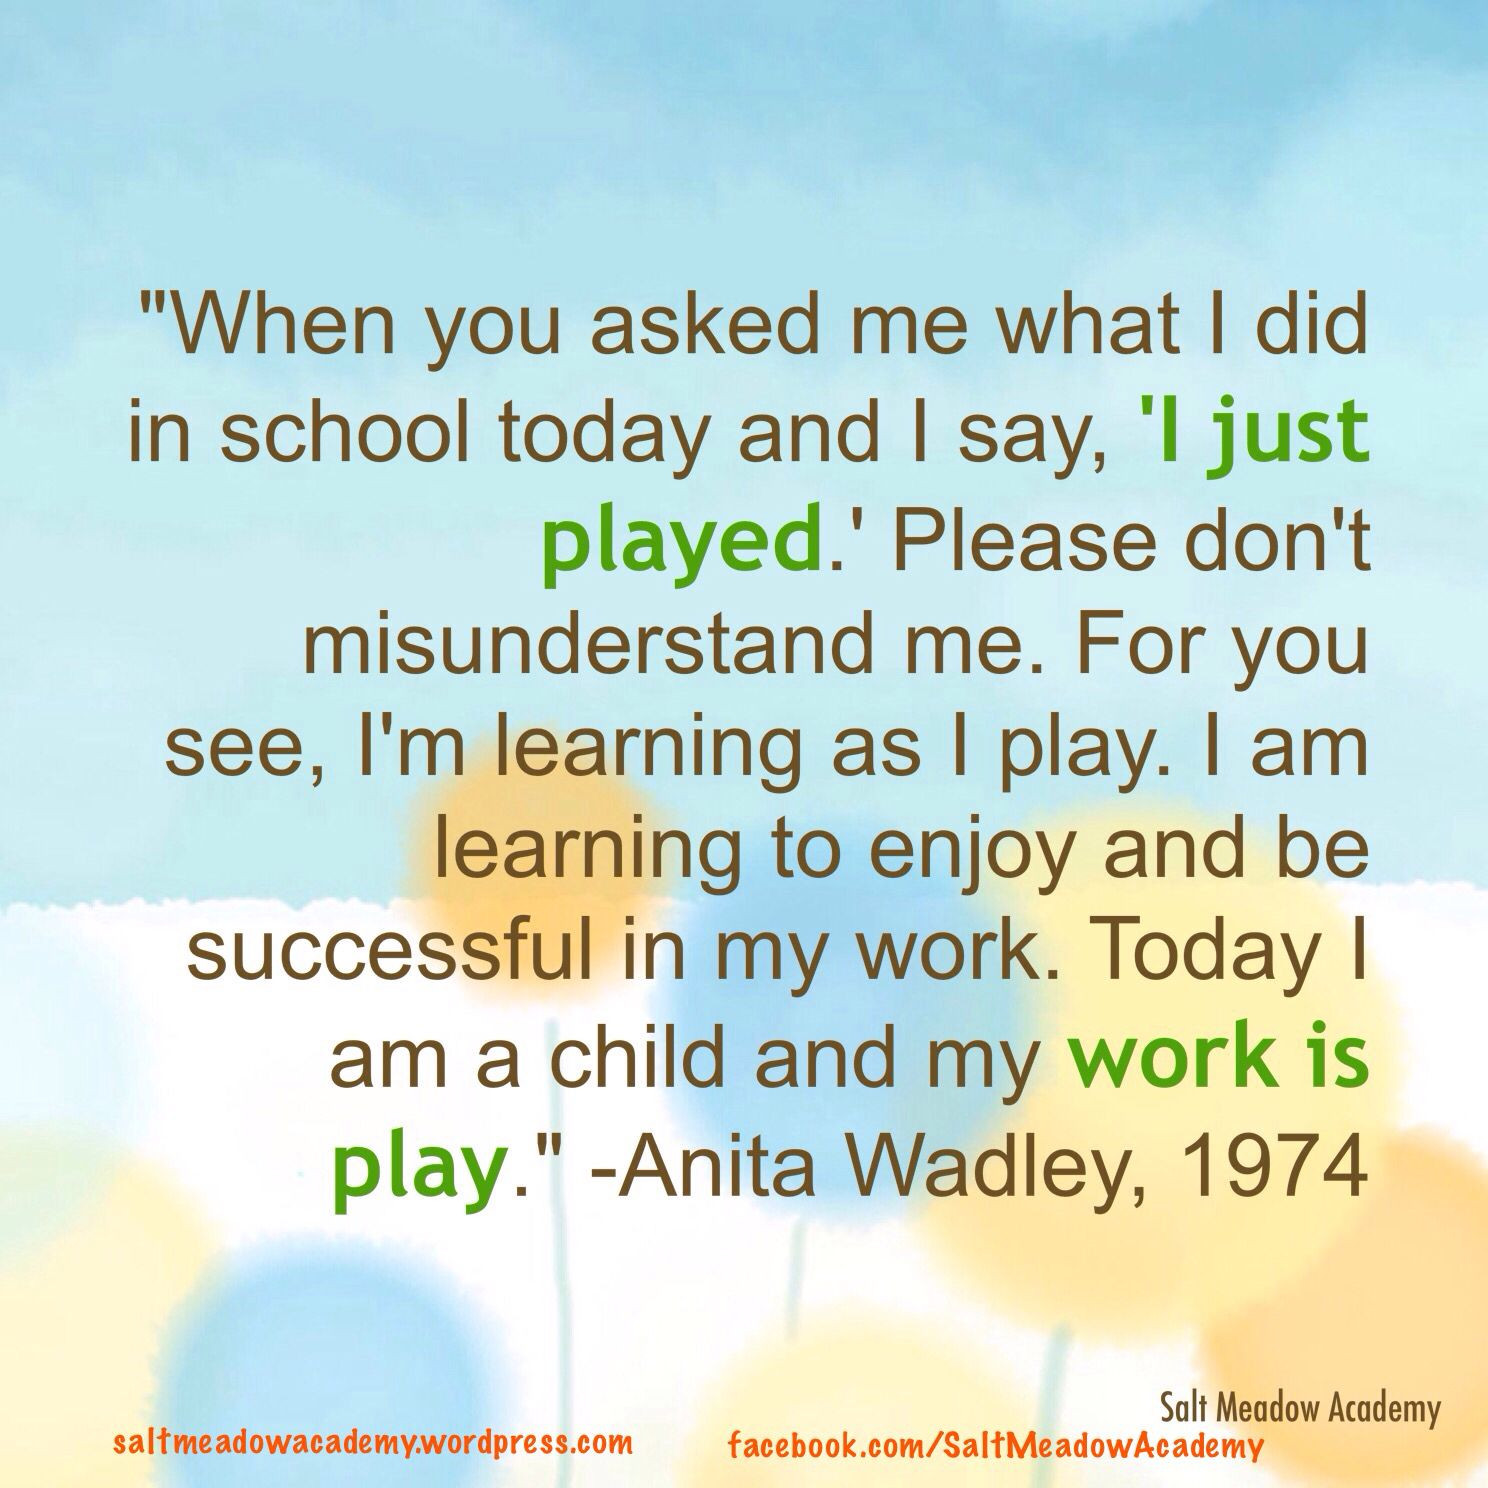 Early Childhood Education Quotes
 Play quote